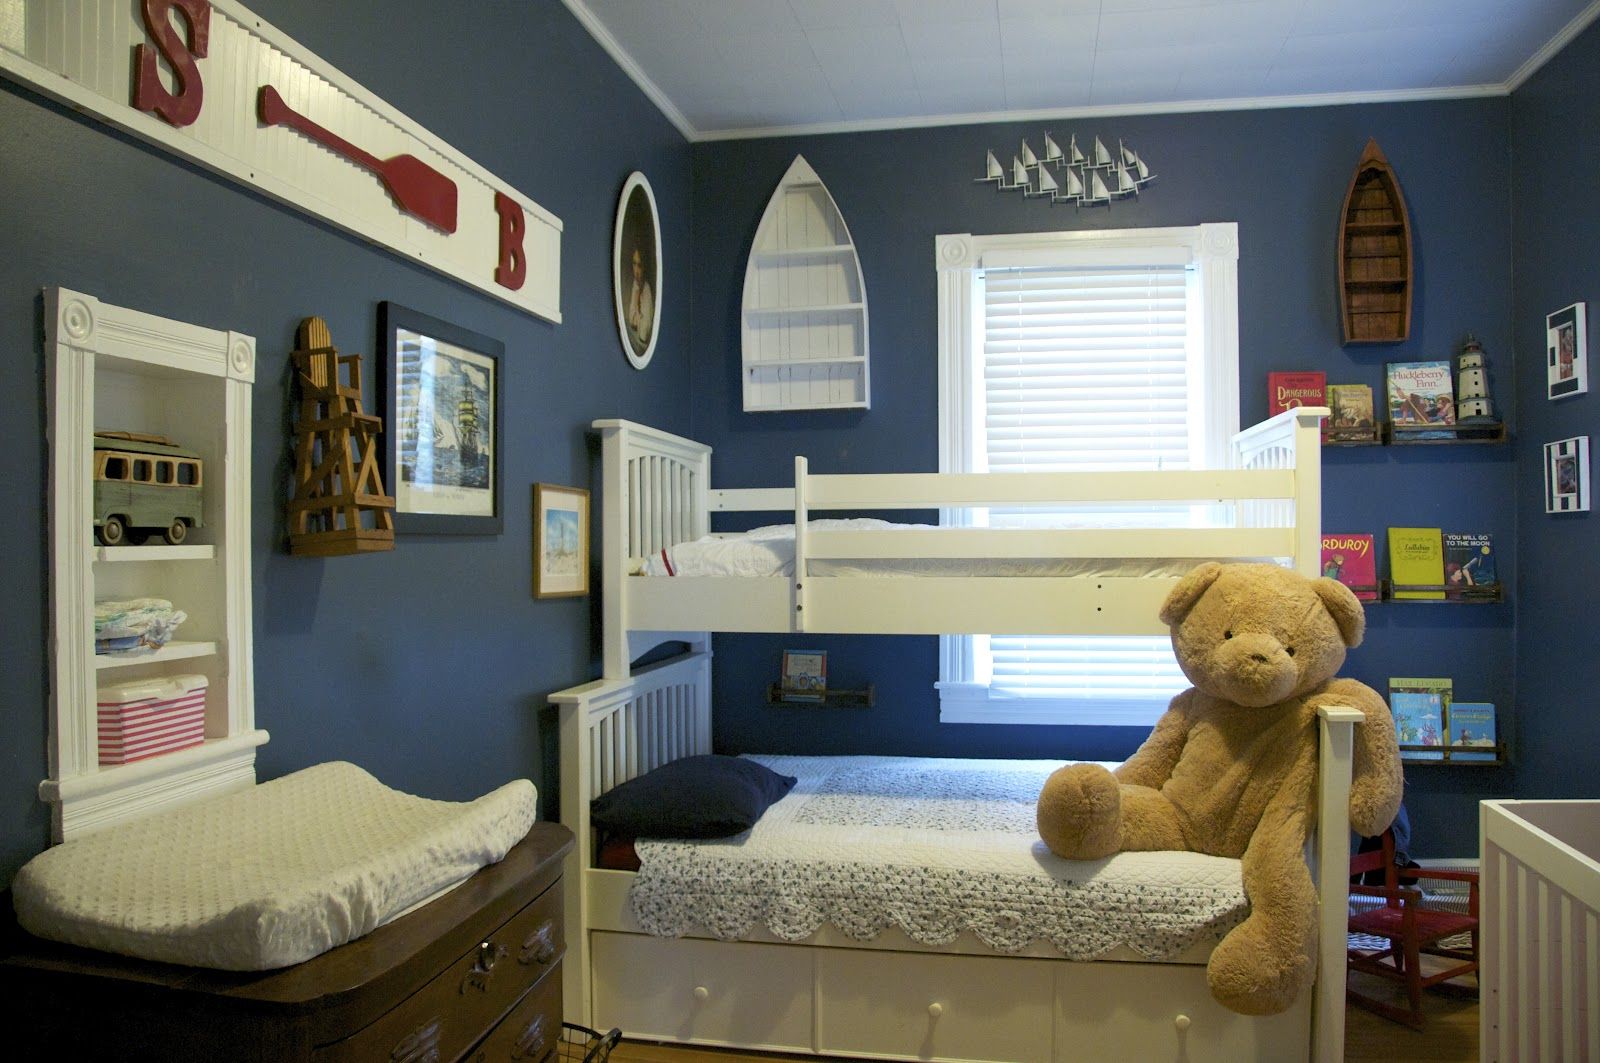 Kids Bedroom Applying Awesome Kids Bedroom For Boys Applying Blue Kids Room Paint Ideas In Ocean Design With Wall Decorations Furnished With White Twin Bunk Beds And Completed With Wall Cabinets Kids Room Colorful And Pattern Kids Room Paint Ideas